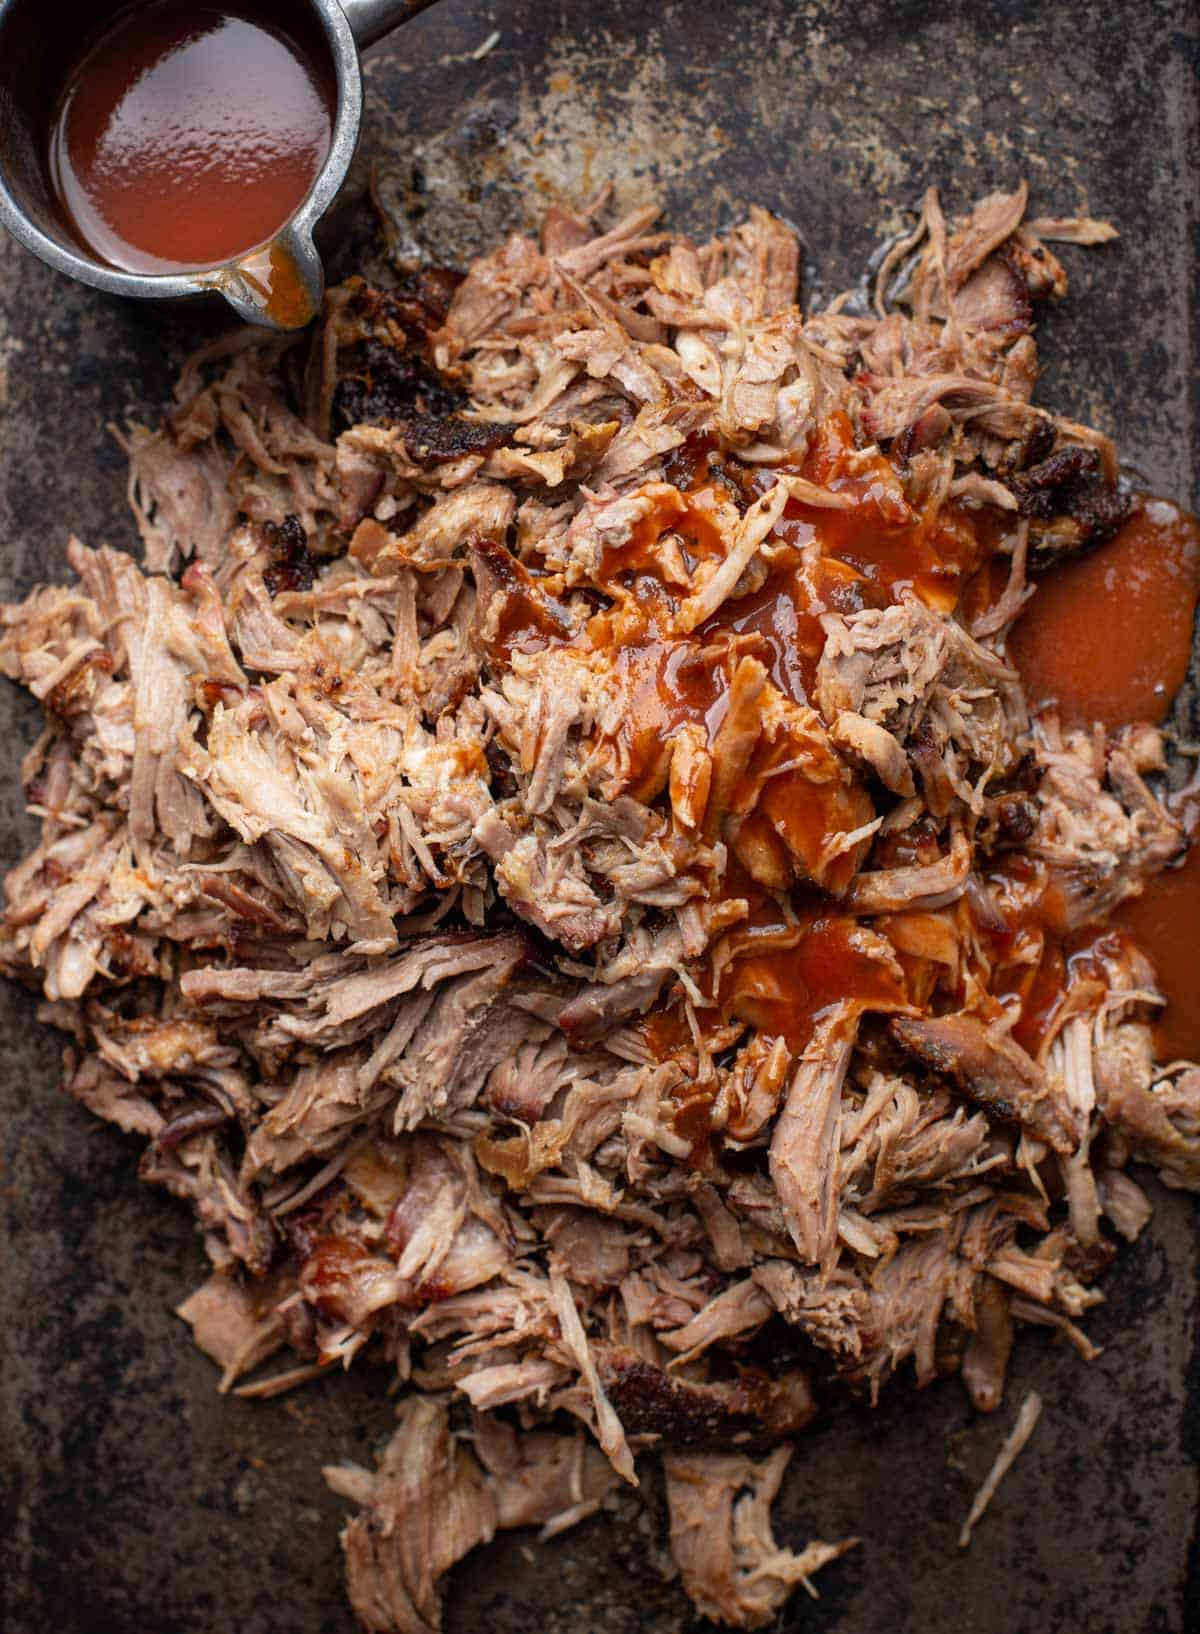 Smoked pulled pork on a sheetpan